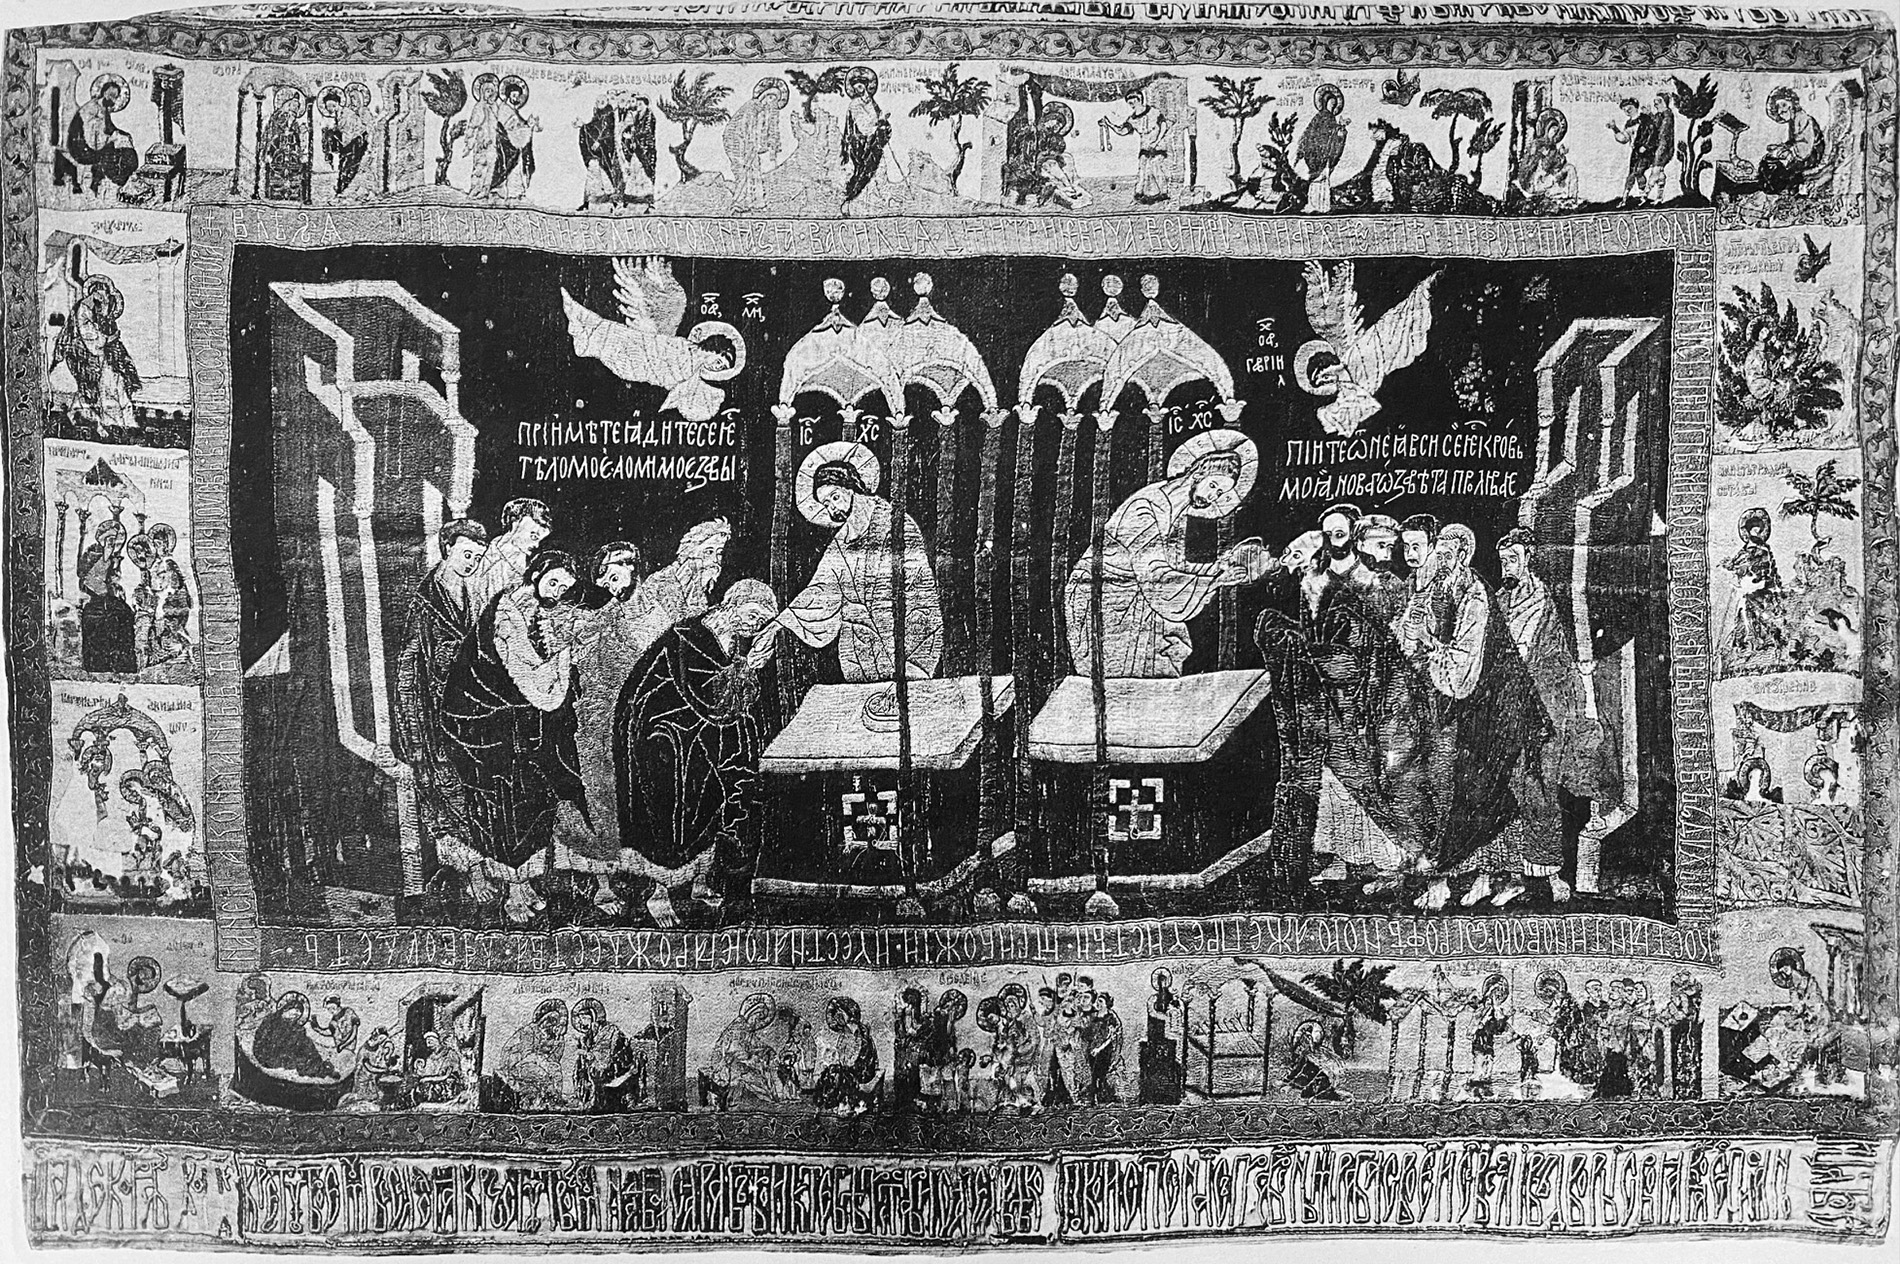 A veil embroidered with a a large center panel with a man standing at an altar and offering bread and wine to groups of other men. A border of smaller scenes surrounds the large center panel.